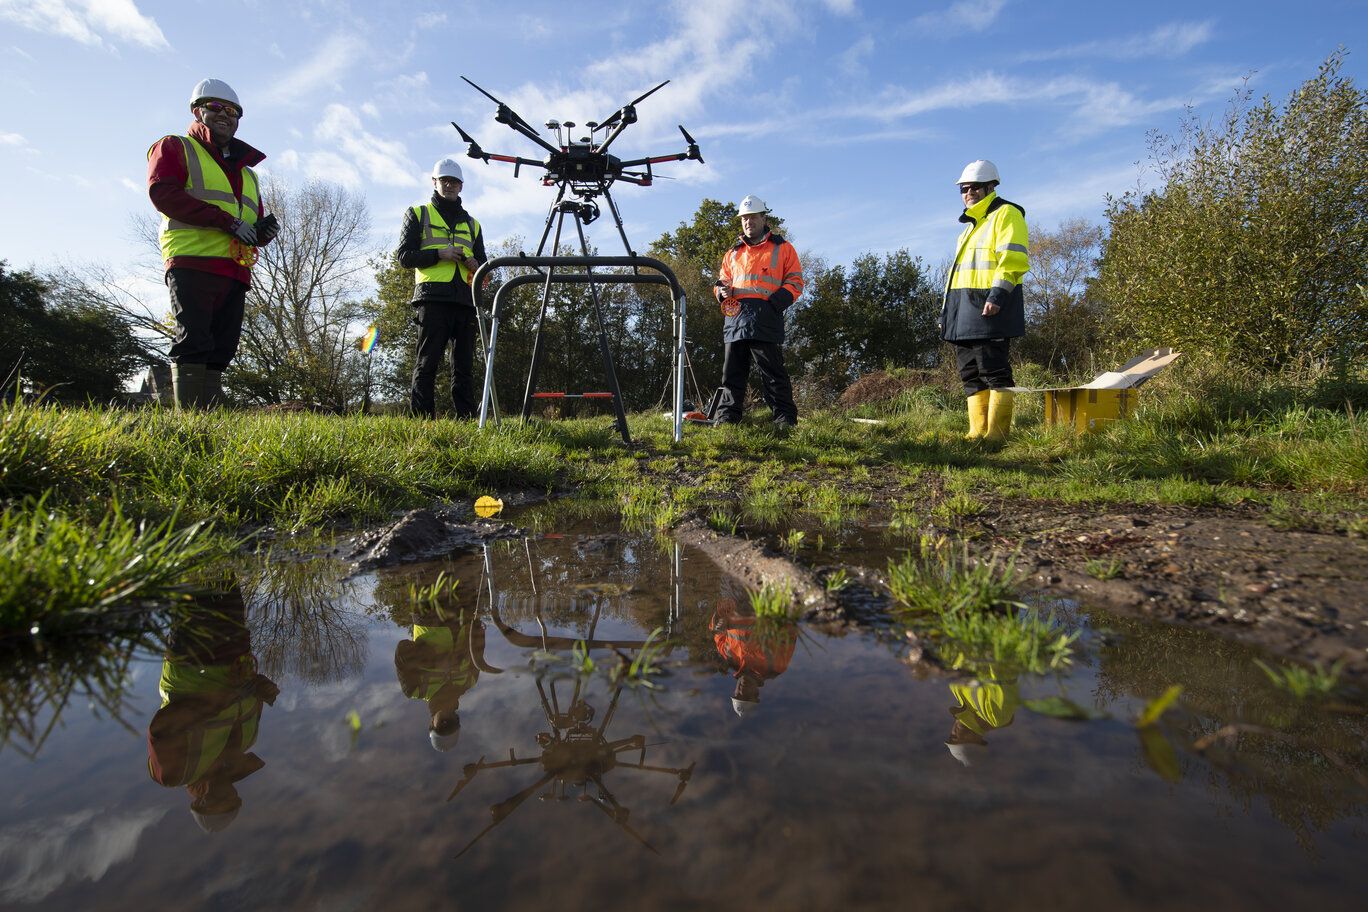 WPD staff standing behind a drone in a field